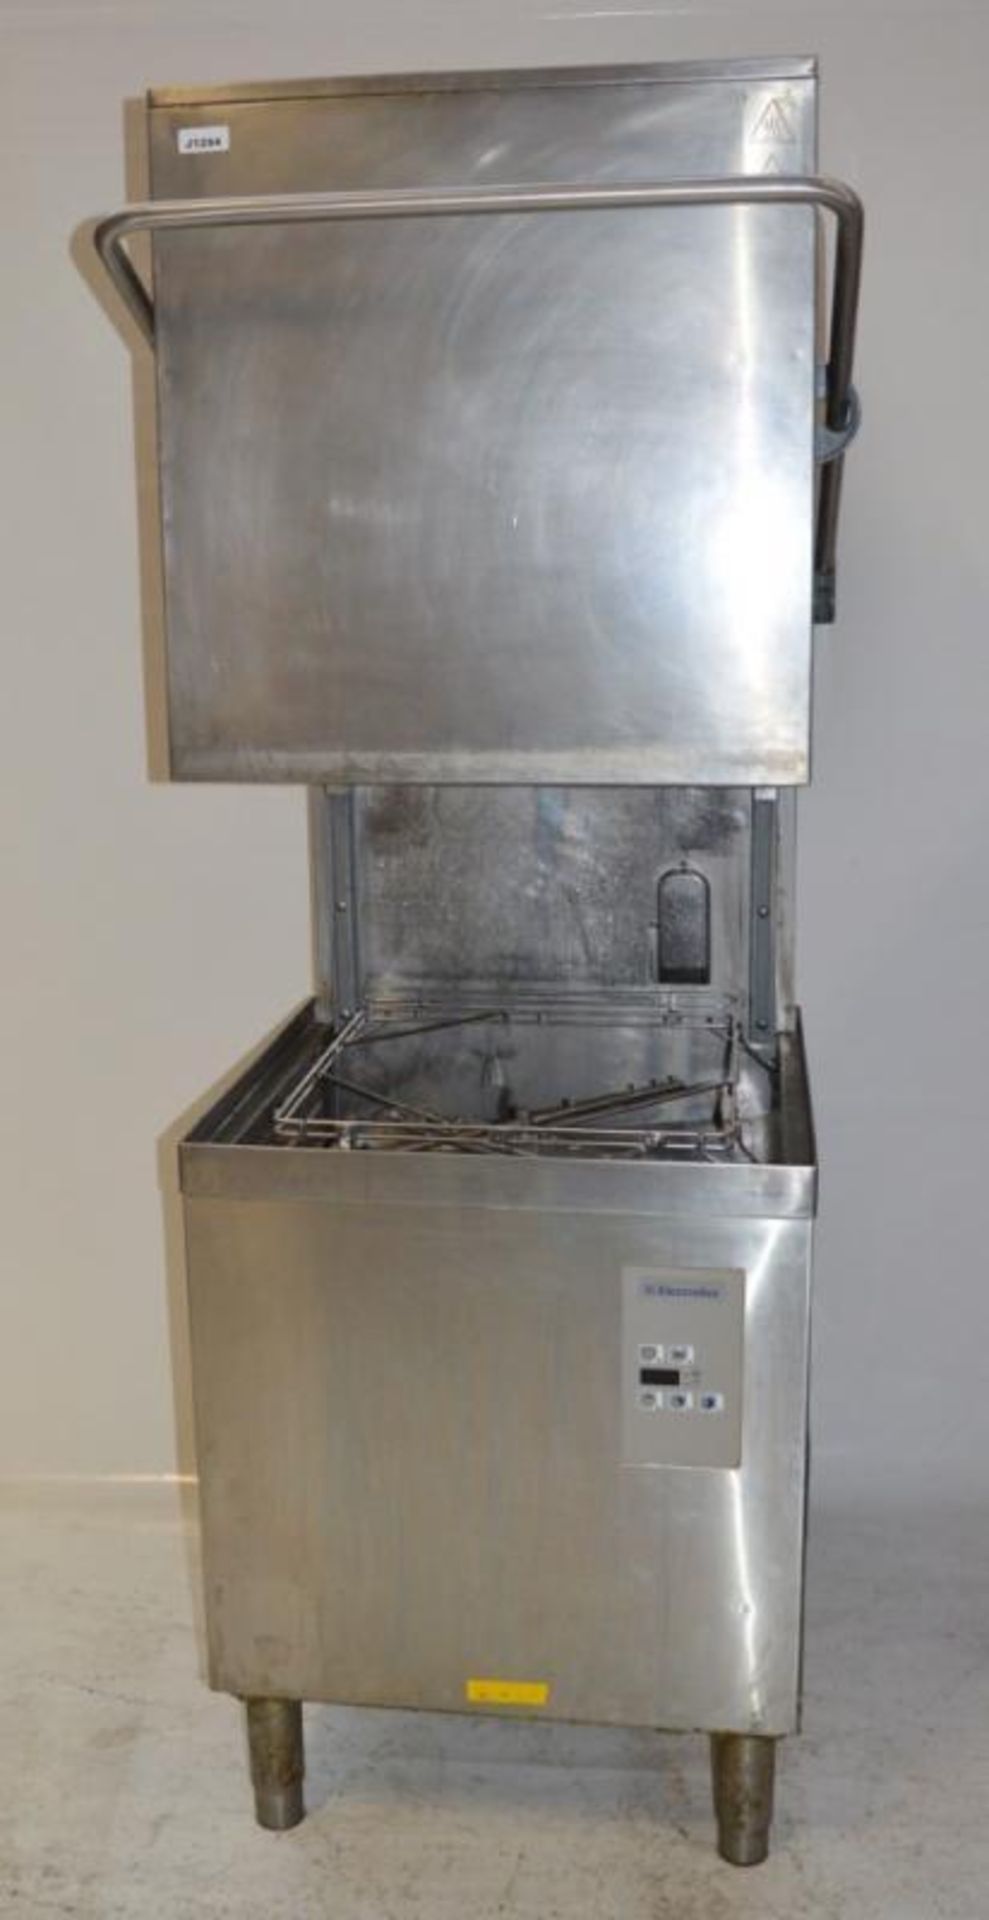 1 x Electrolux NHTG Stainless Steel Passthrough Dishwasher With Brightwell D1 Automatic Dosing Pump - Image 9 of 13